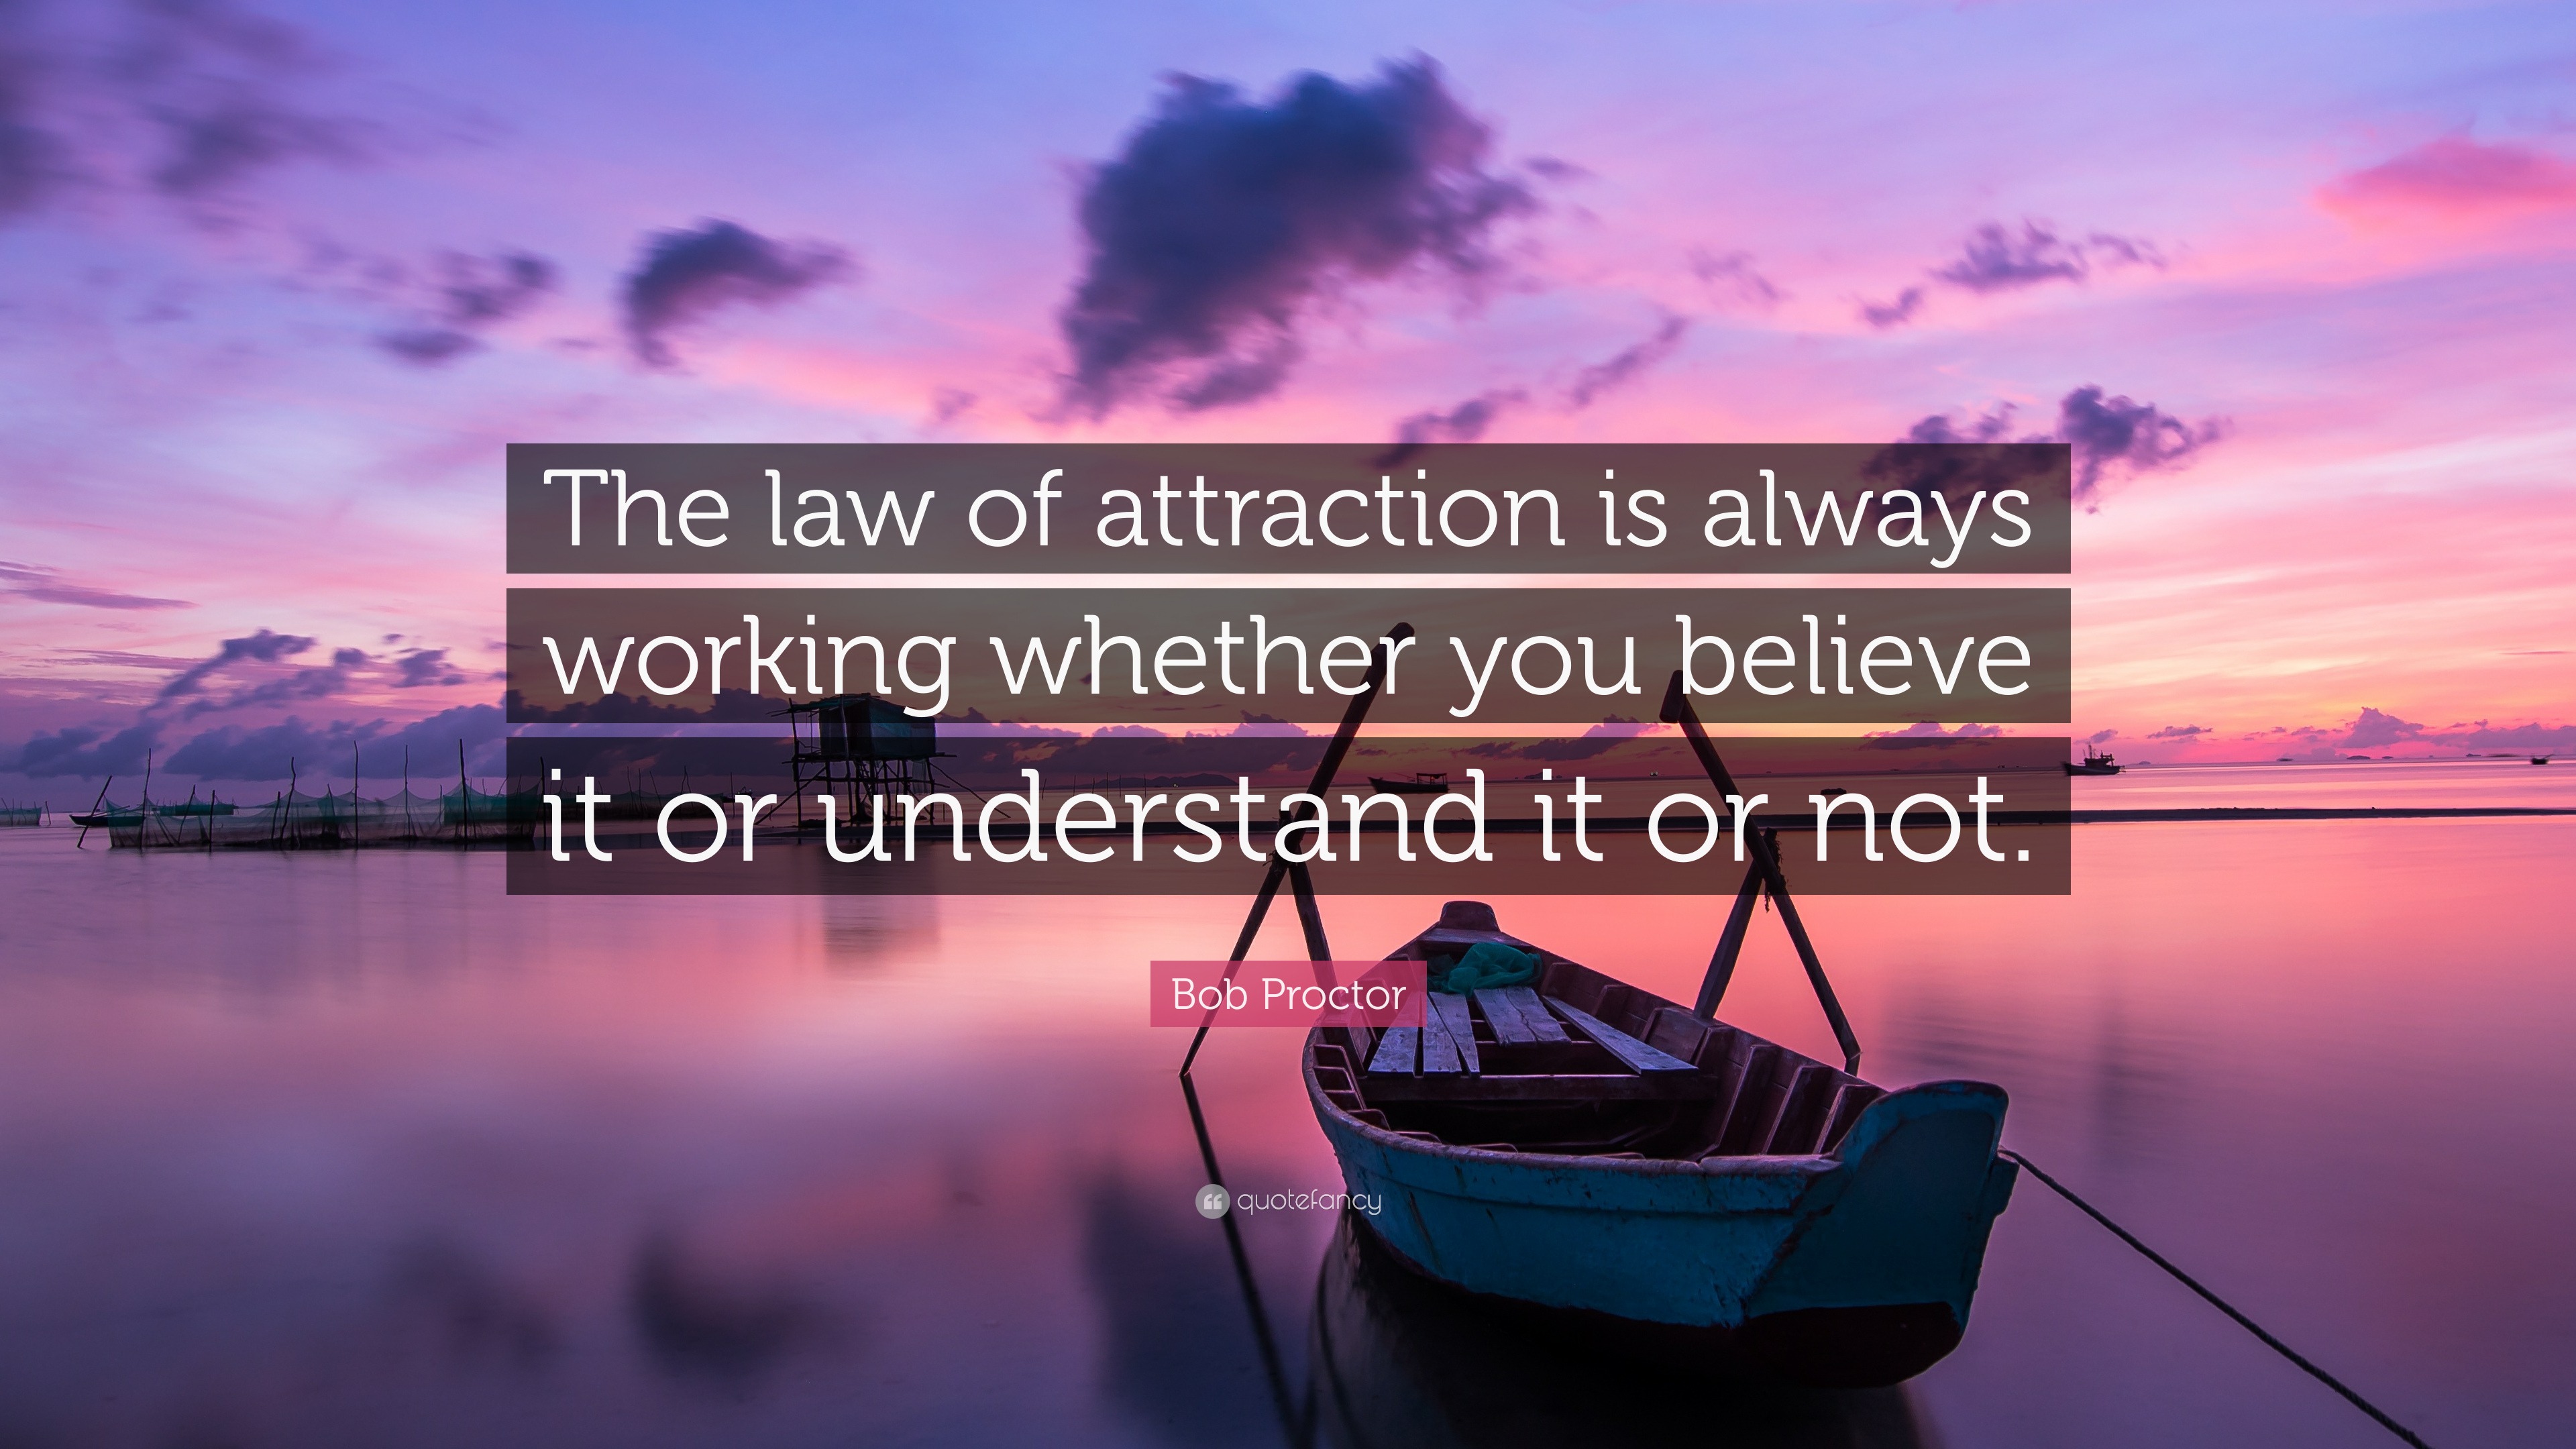 Top 50 Bob Proctor Quotes About Prosperity & Law of Attraction